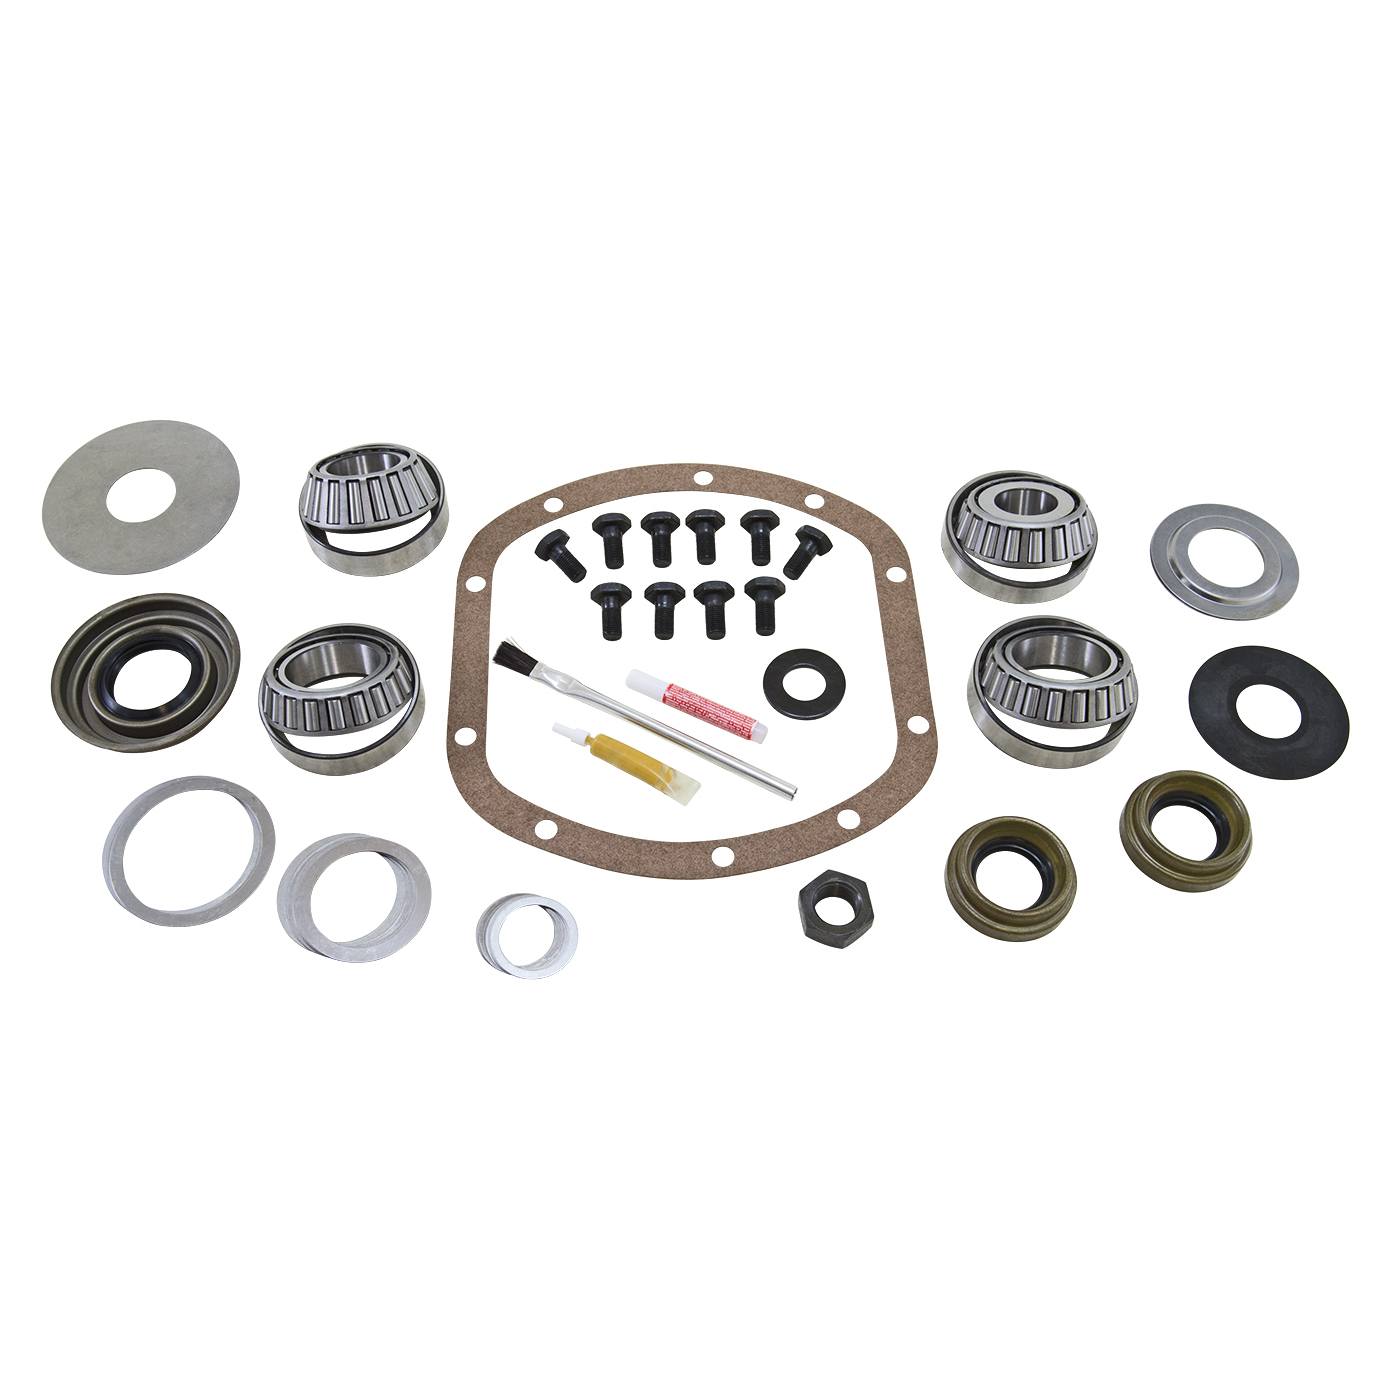 Scout II, Scout 800 Master Overhaul kit for Dana 30 front differential